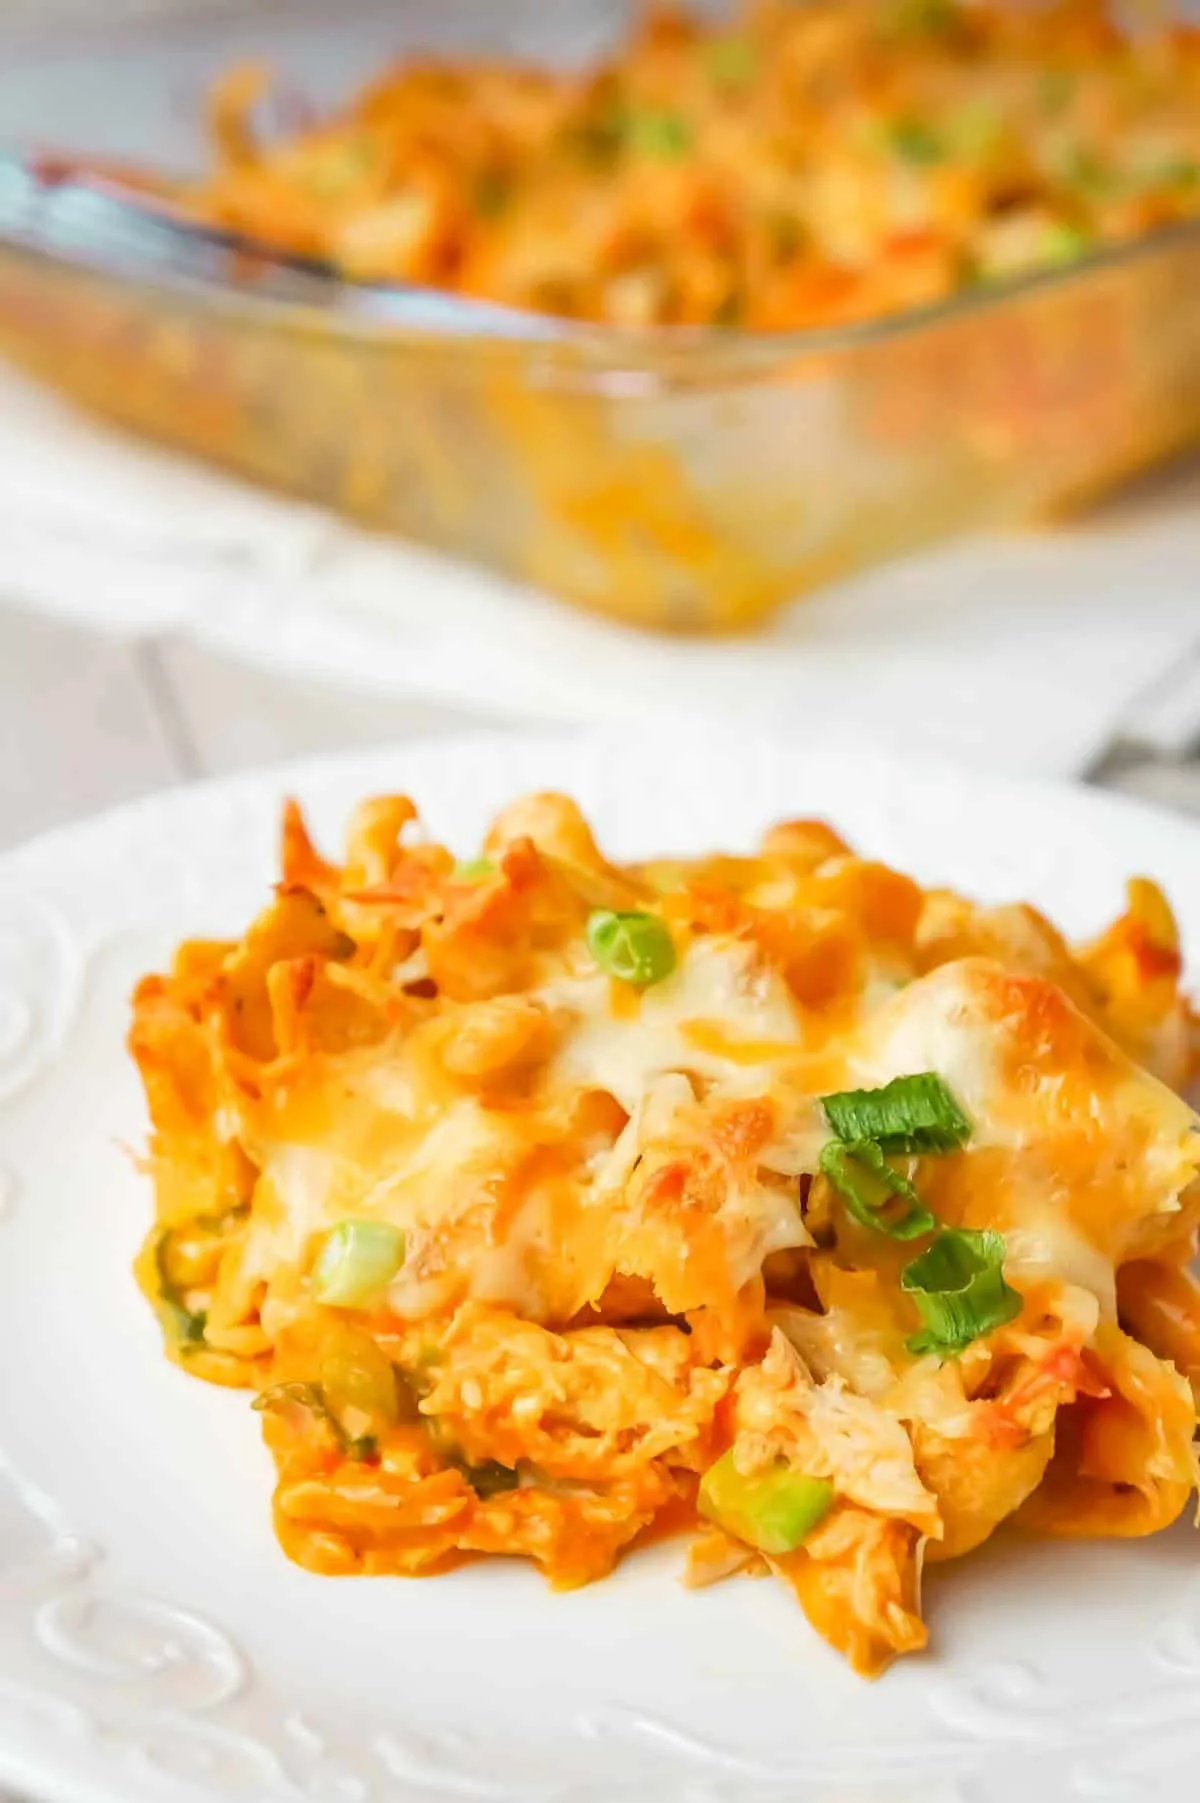 Buffalo Chicken Frito Pie is an easy casserole recipe using shredded rotisserie chicken and diced celery tossed in Buffalo sauce and ranch dressing, all topped with Fritos corn chips and cheese.